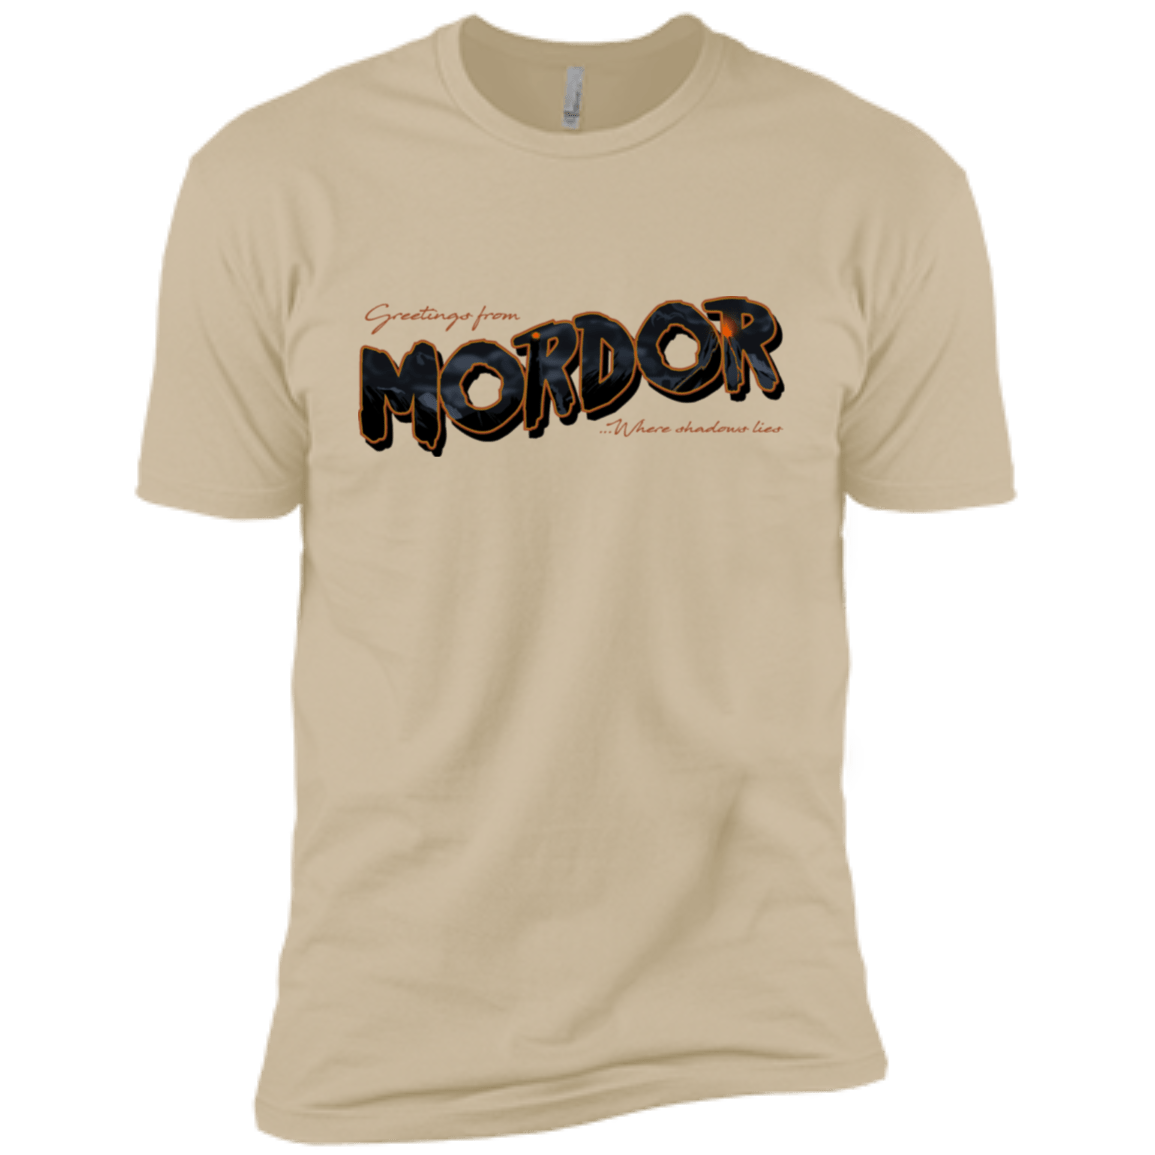 T-Shirts Sand / X-Small Greetings From Mordor Men's Premium T-Shirt